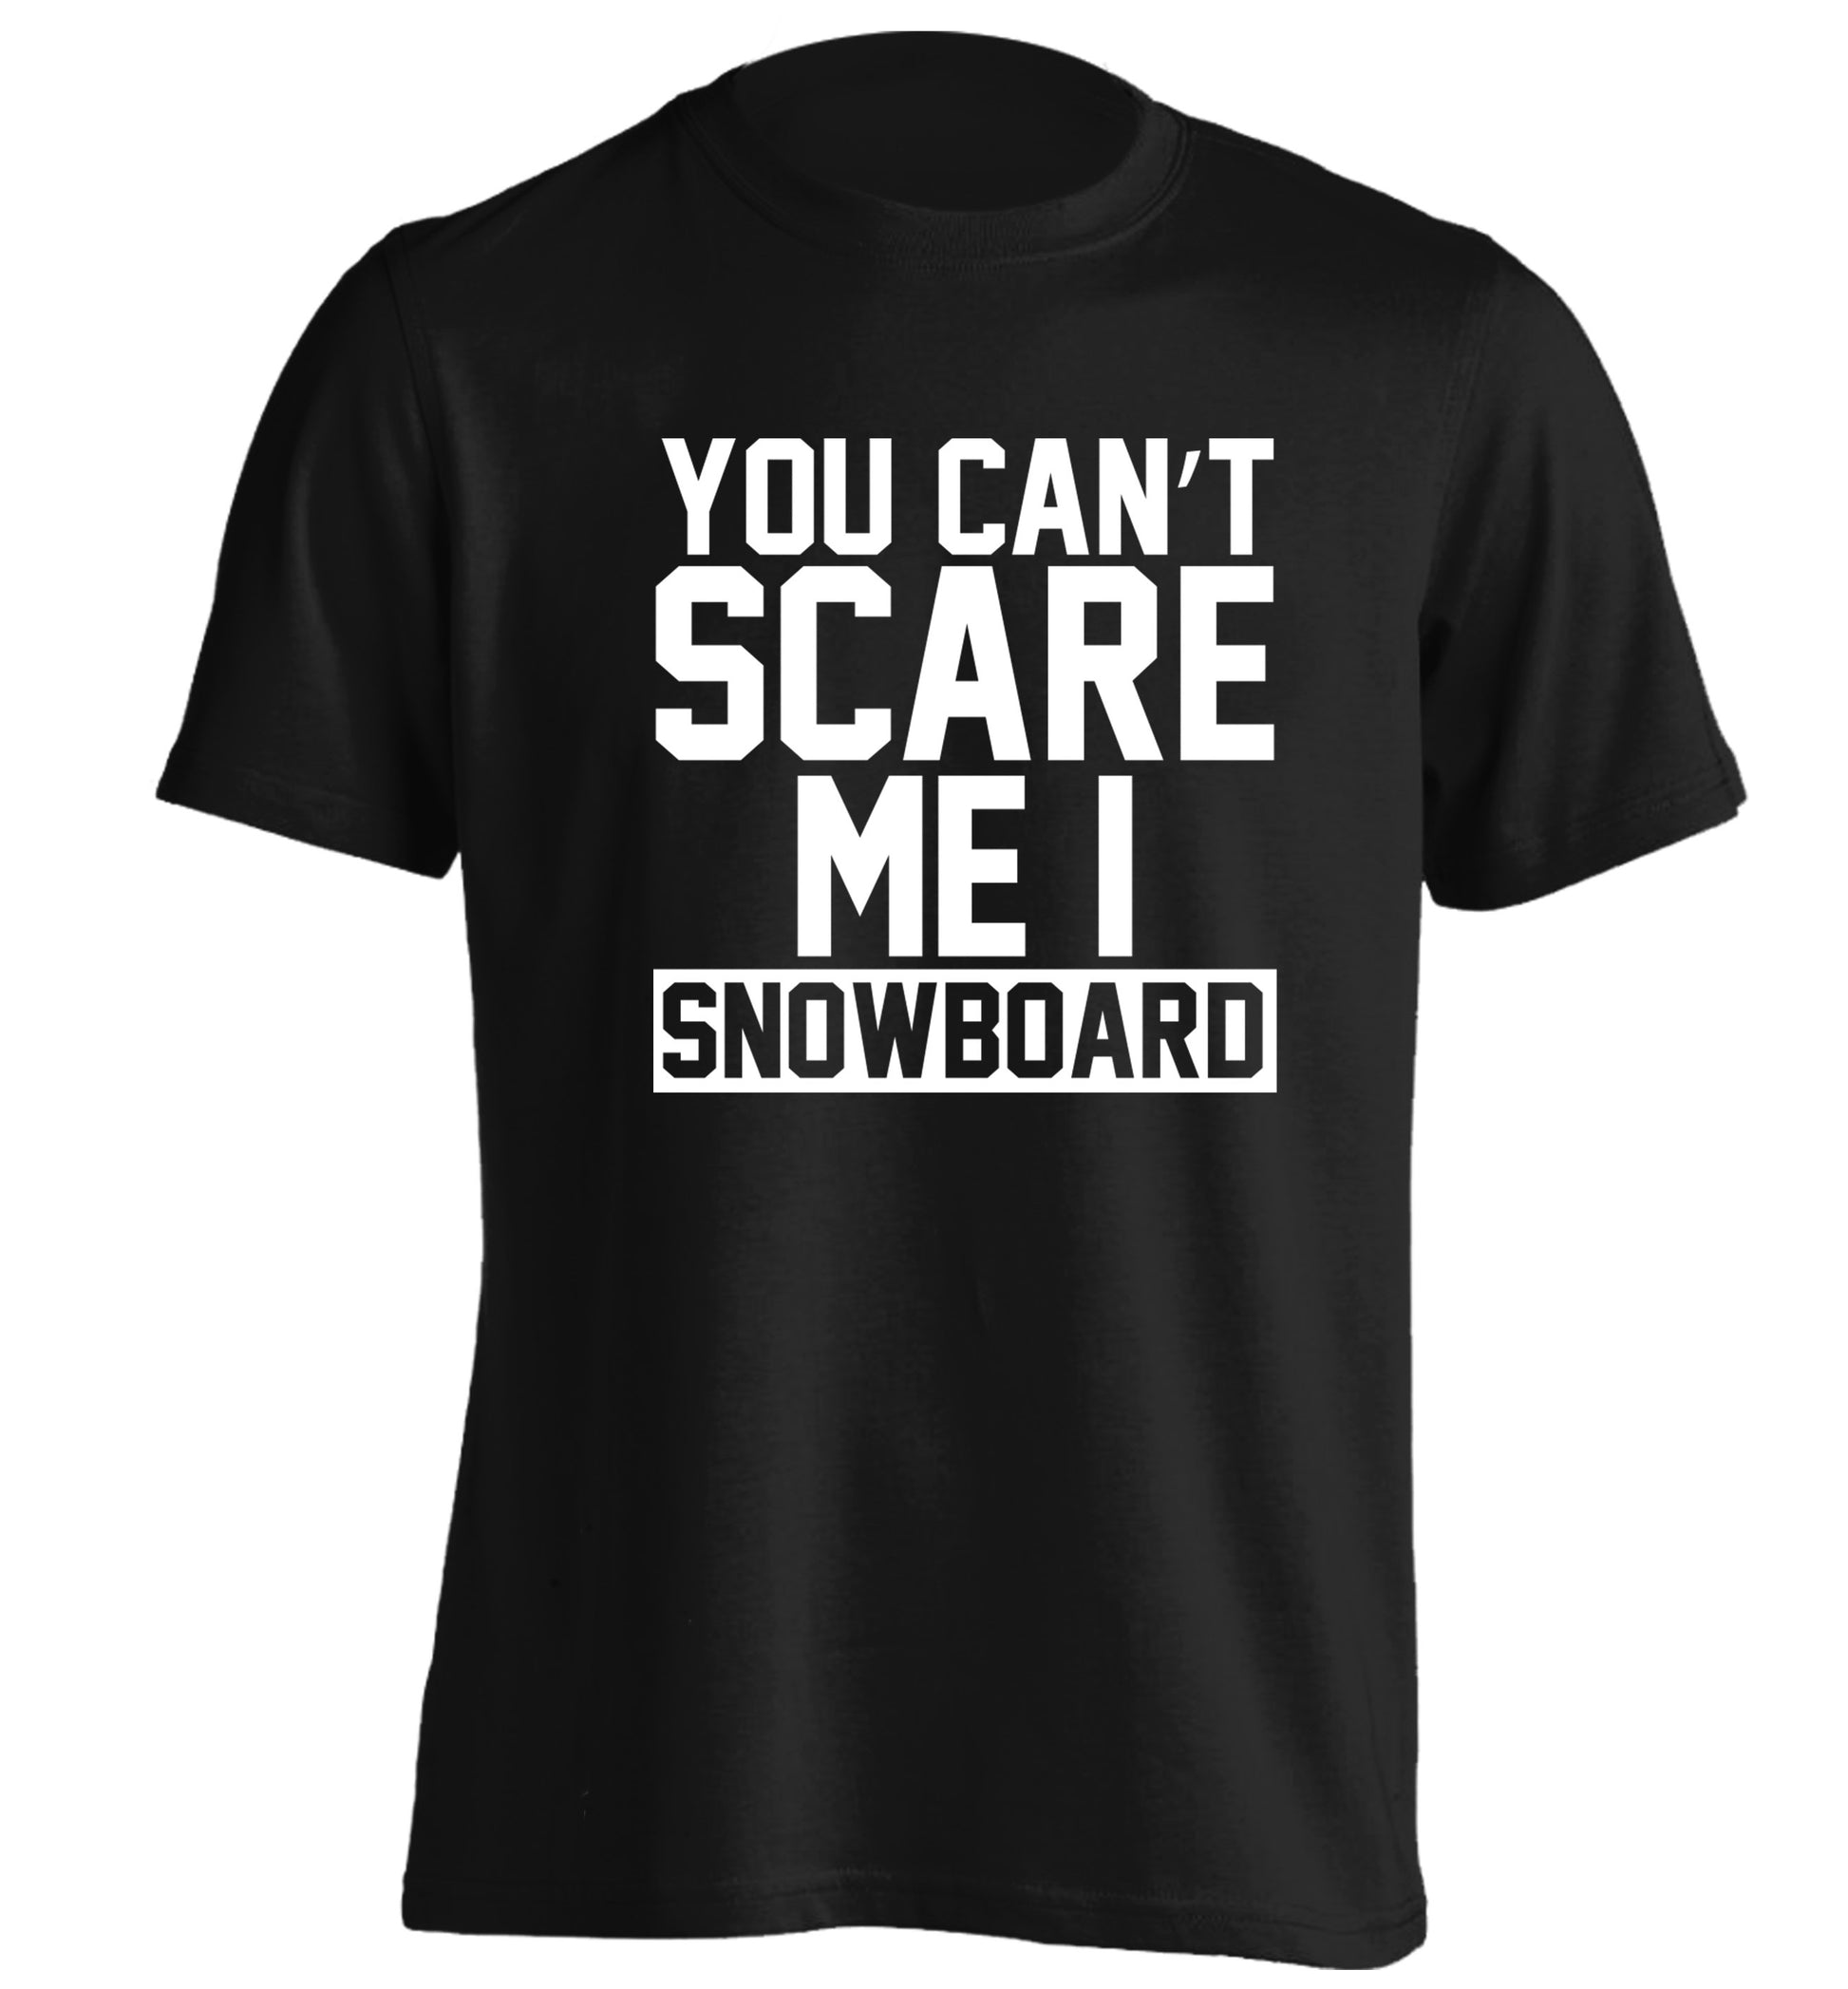 You can't scare me I snowboard adults unisex black Tshirt 2XL